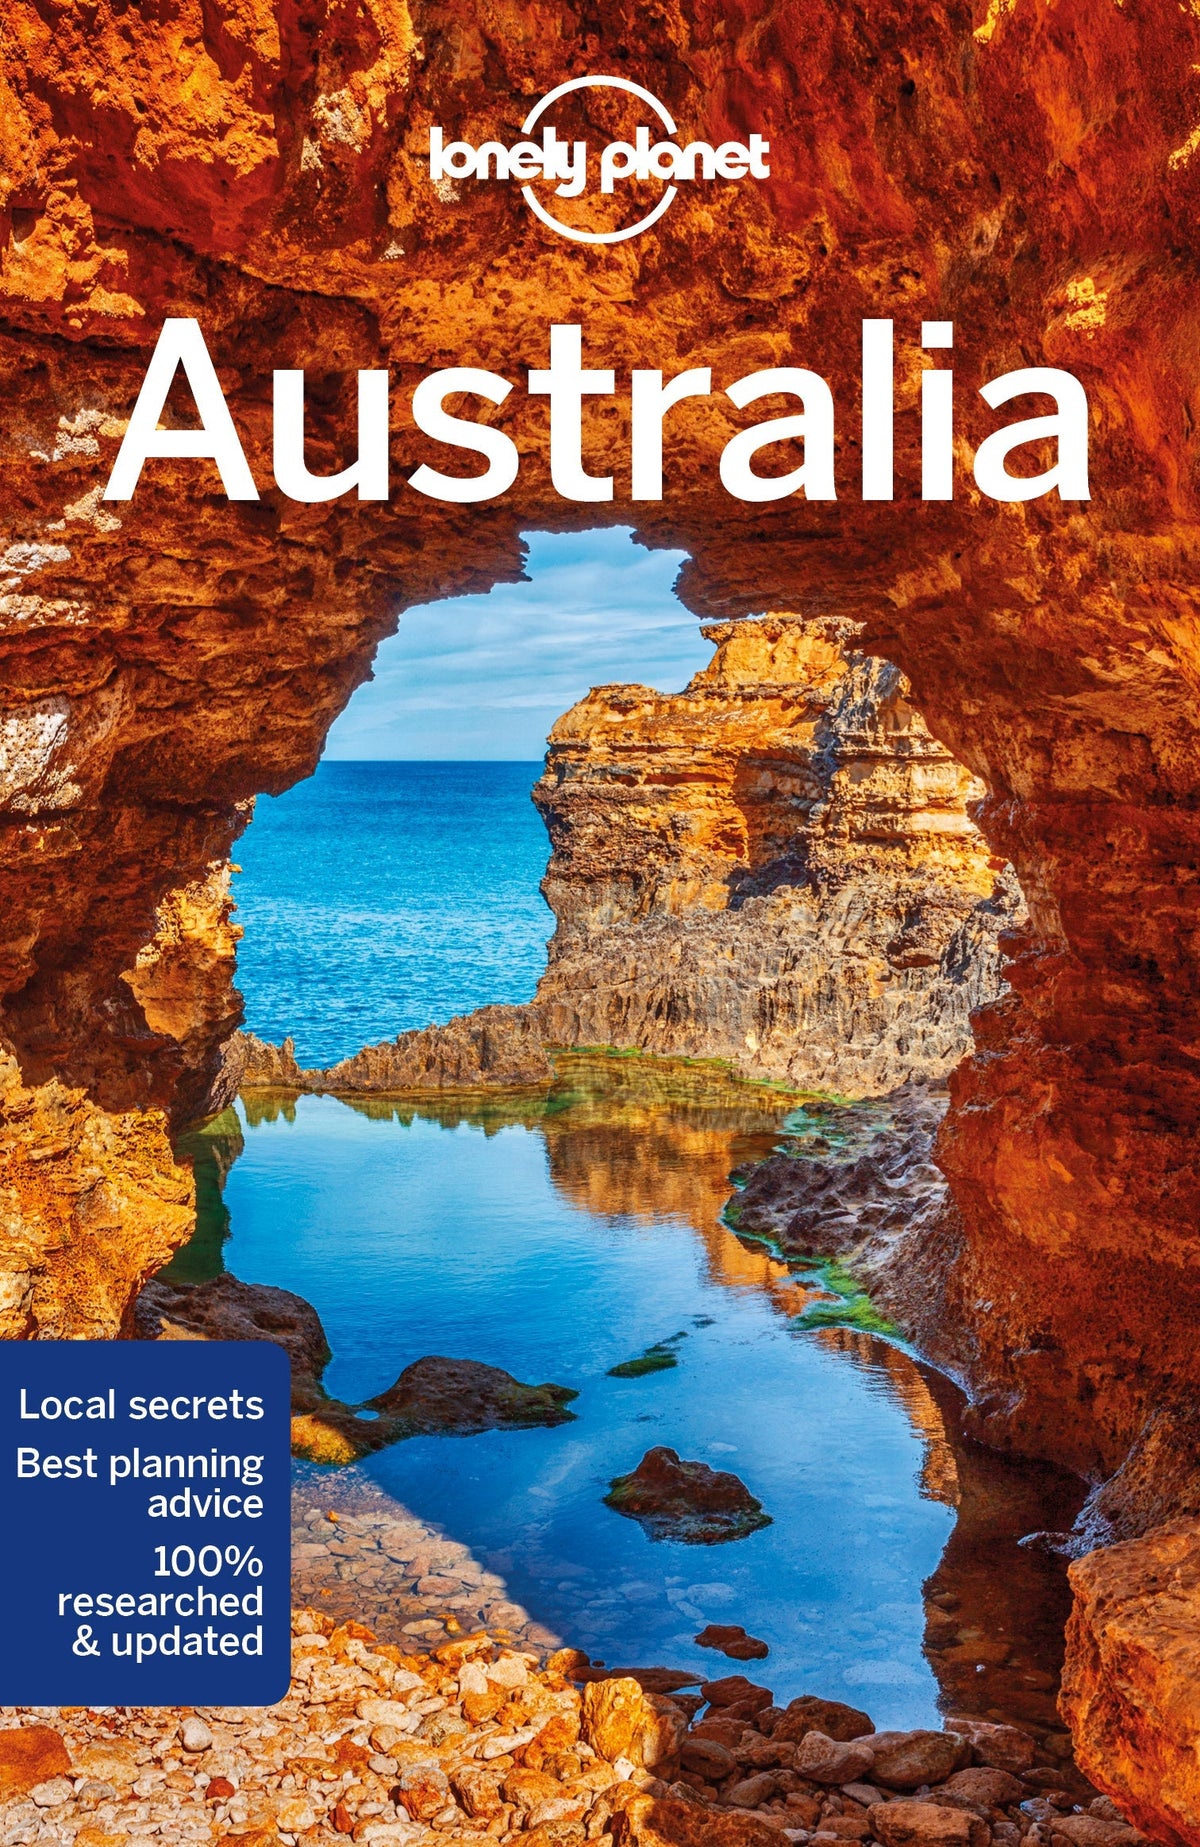 Shopping in Australia – Travel guide at Wikivoyage